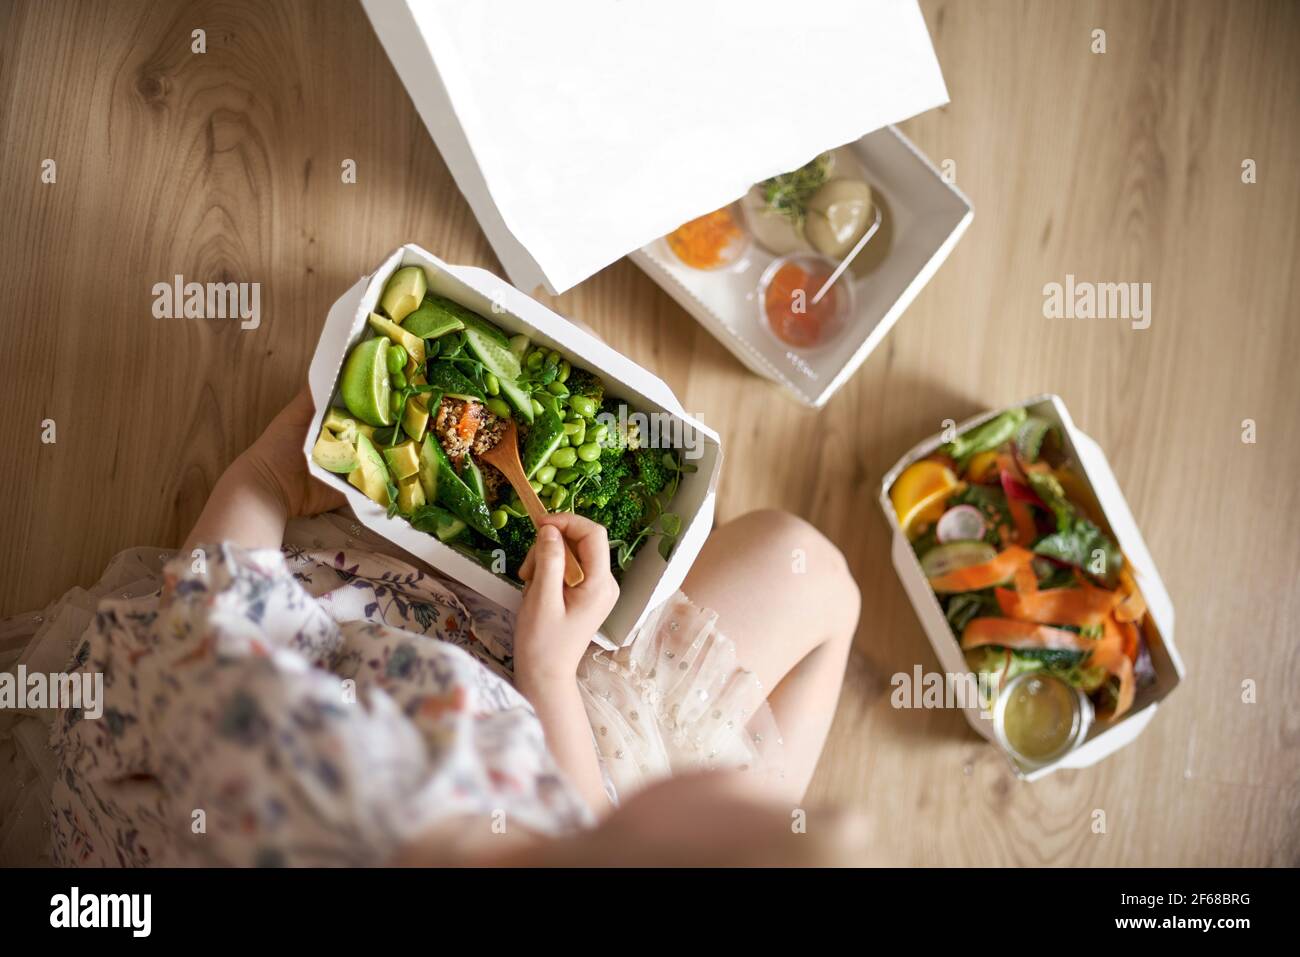 Download Food Delivery Concept The Girl Takes Out Salads From The Package Healthy Food Top View Copy Space Paper Container Mockup Stock Photo Alamy